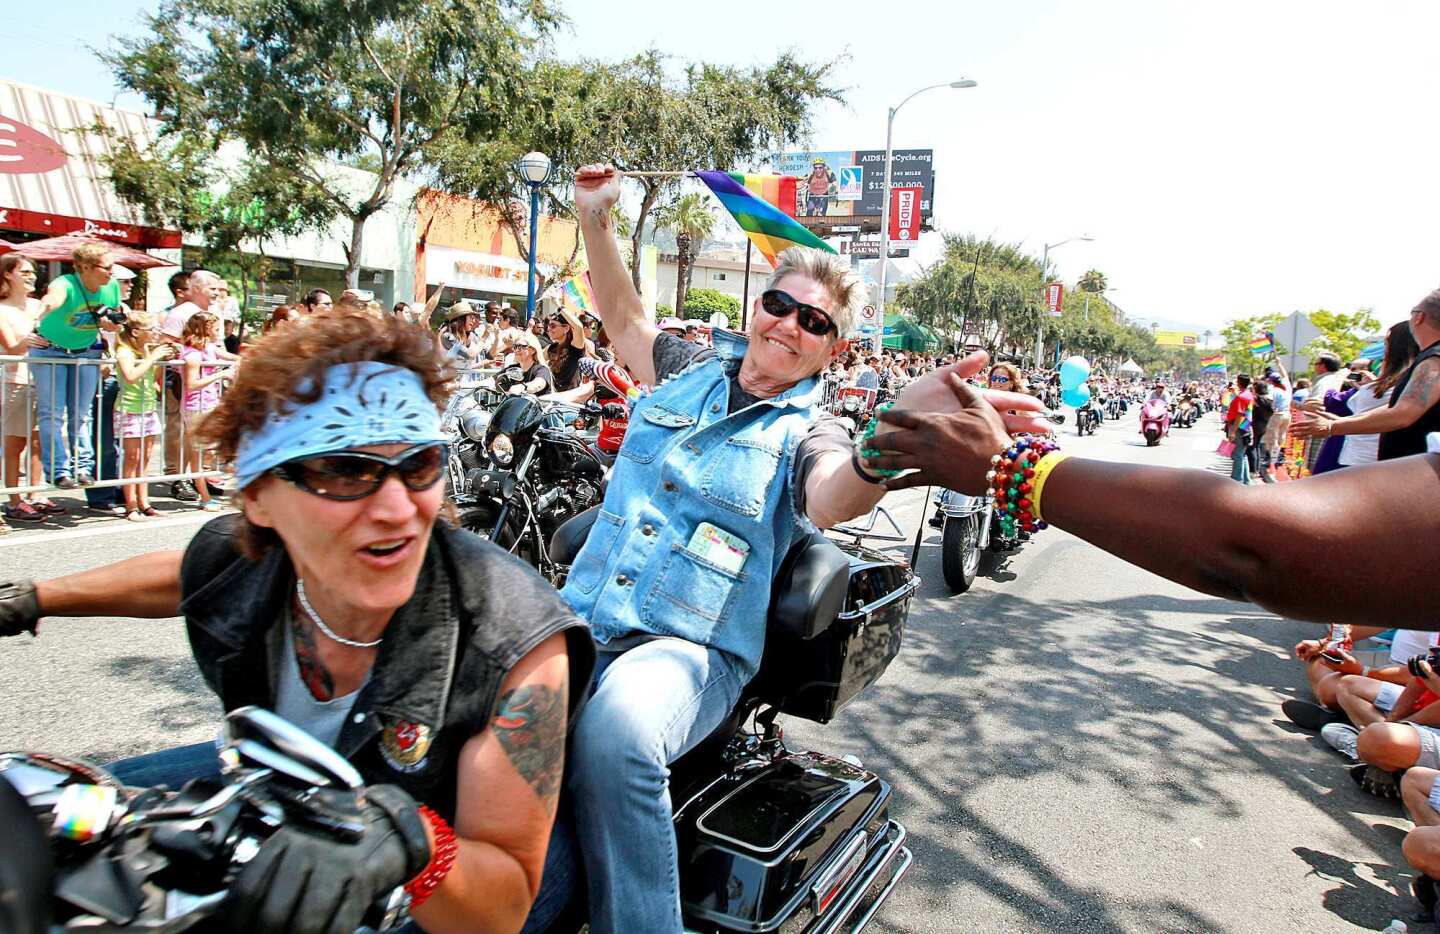 2012 L.A. Pride Parade: Parade participants ride motorcycles down Santa Monica Boulevard during the L.A. Pride Parade in West Hollywood on Sunday.